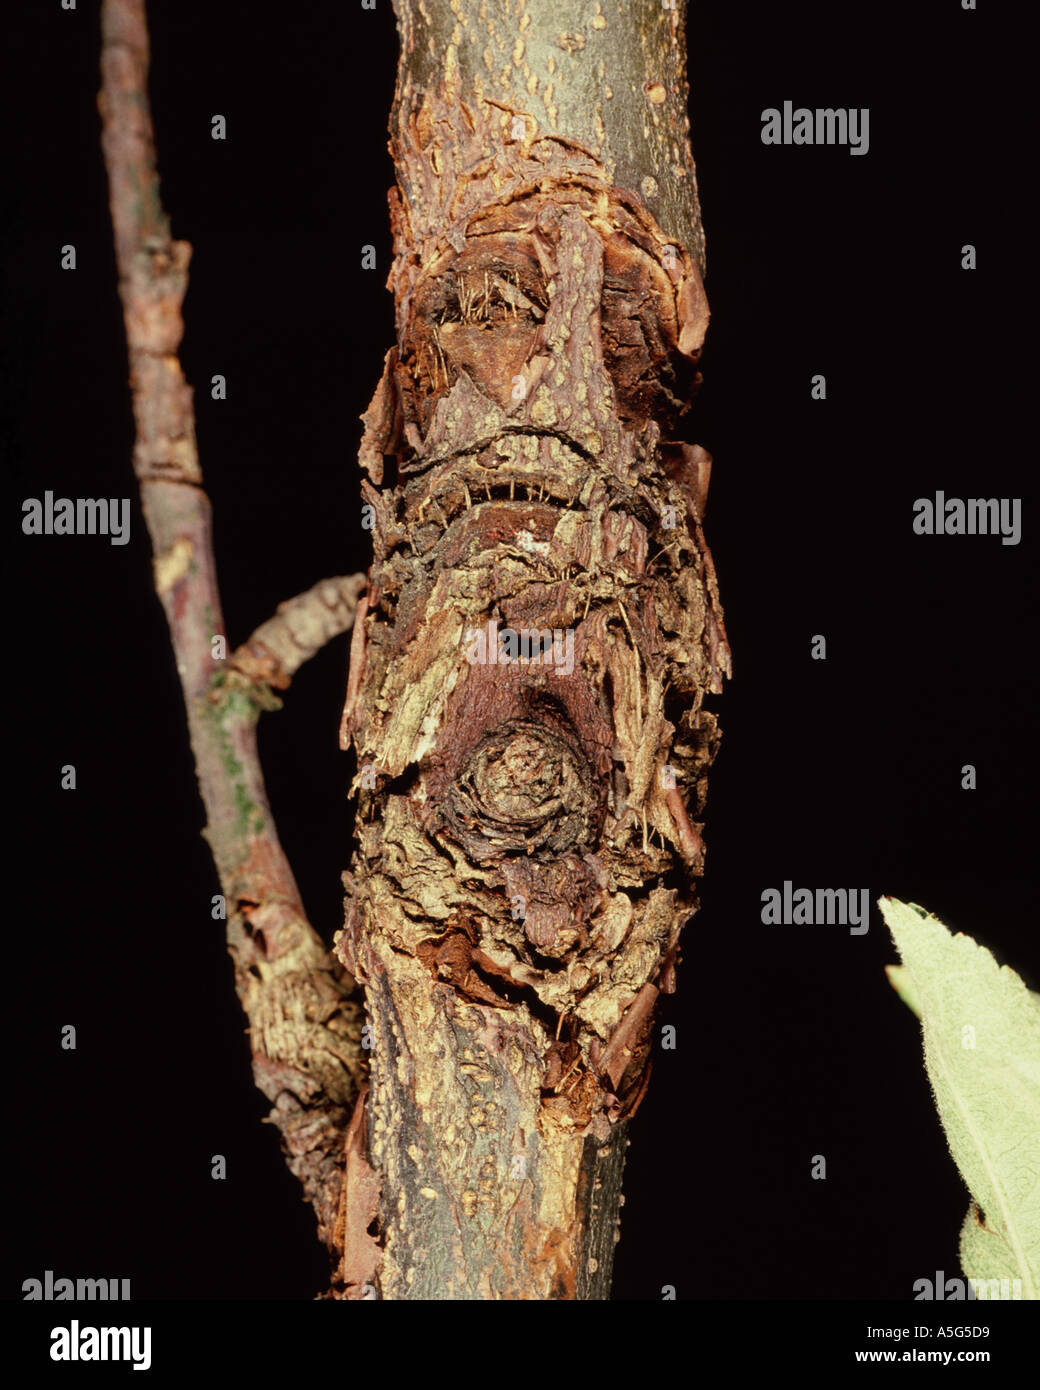 Apple canker lesions Neonectria ditissima on an old apple wood branch Stock Photo